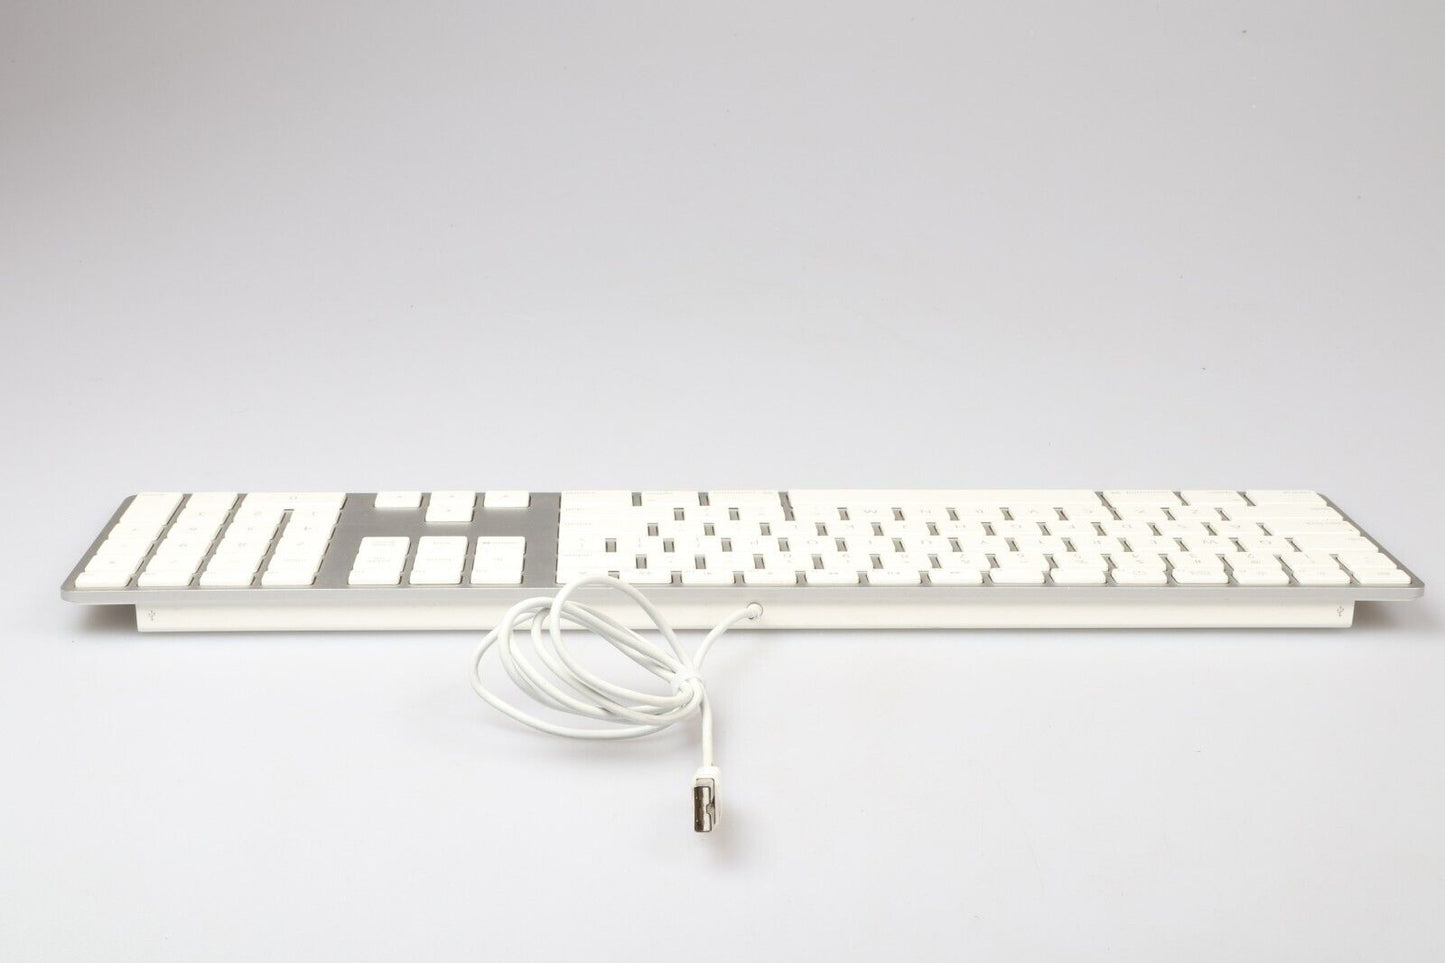 Apple Keyboard A1243 | Wired | White